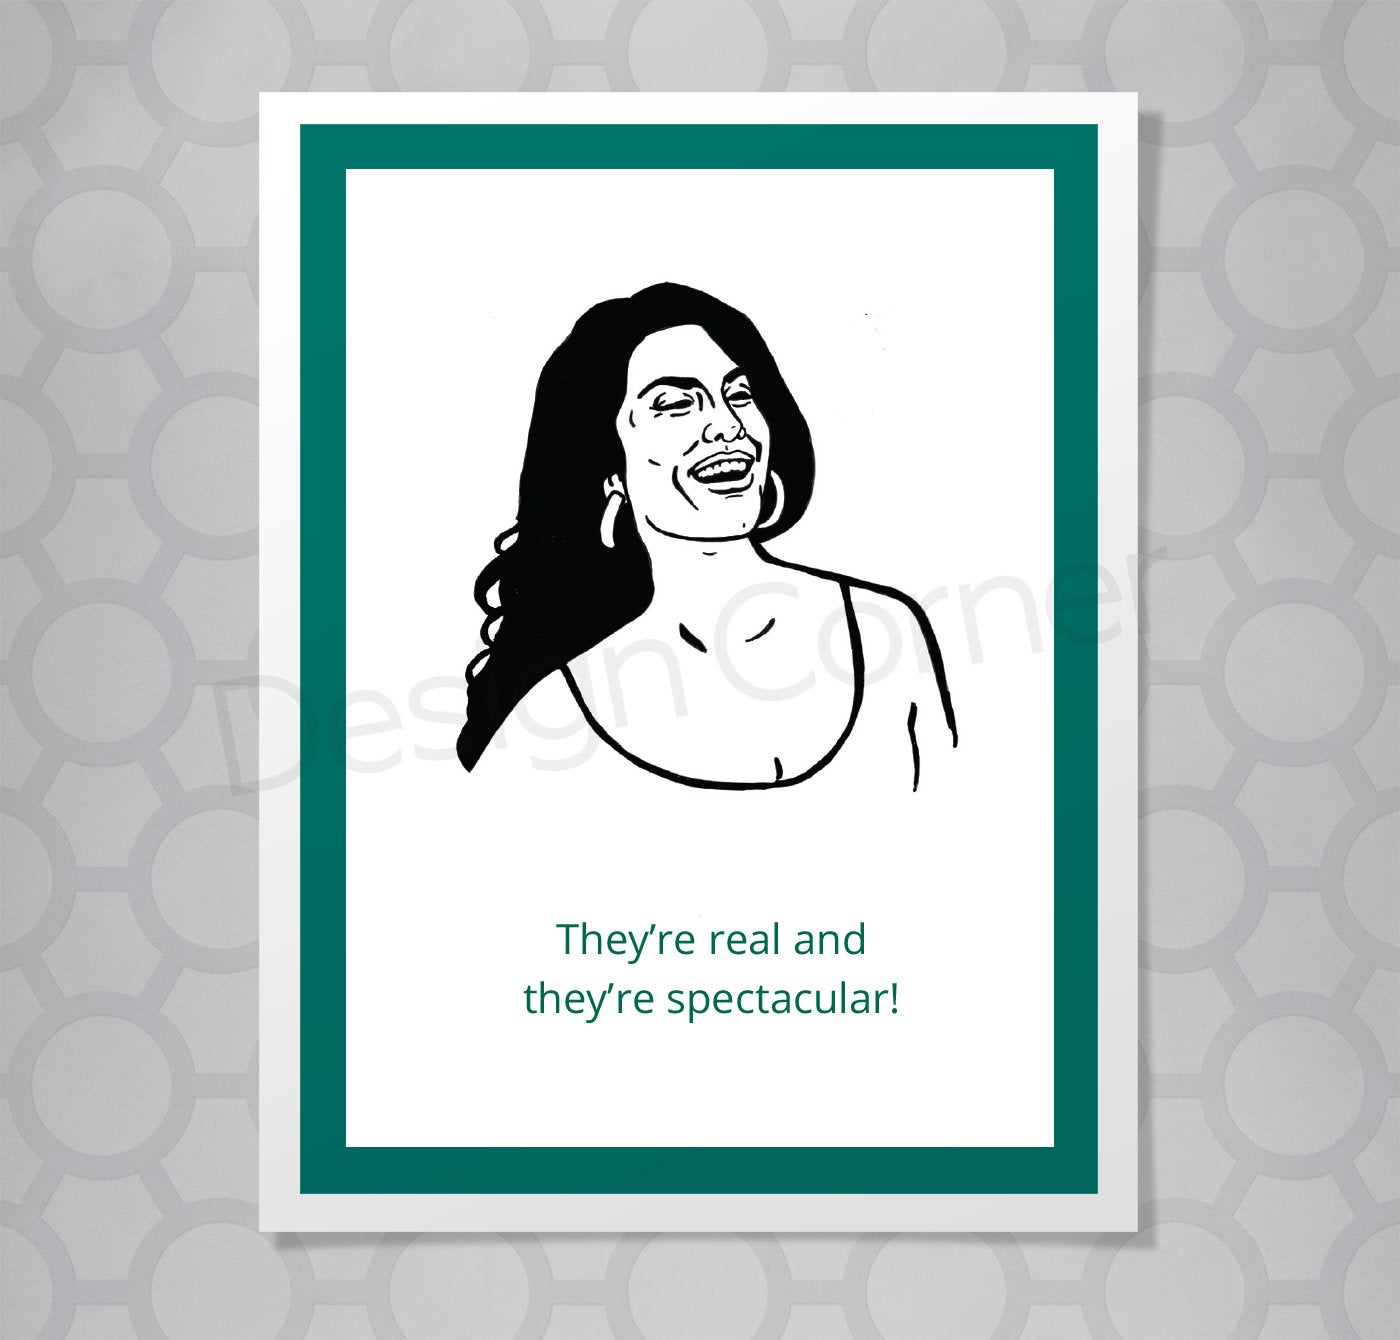 Greeting card with illustration of Seinfeld's character with low cut shirt. Caption says "They're real and they're spectacular!"